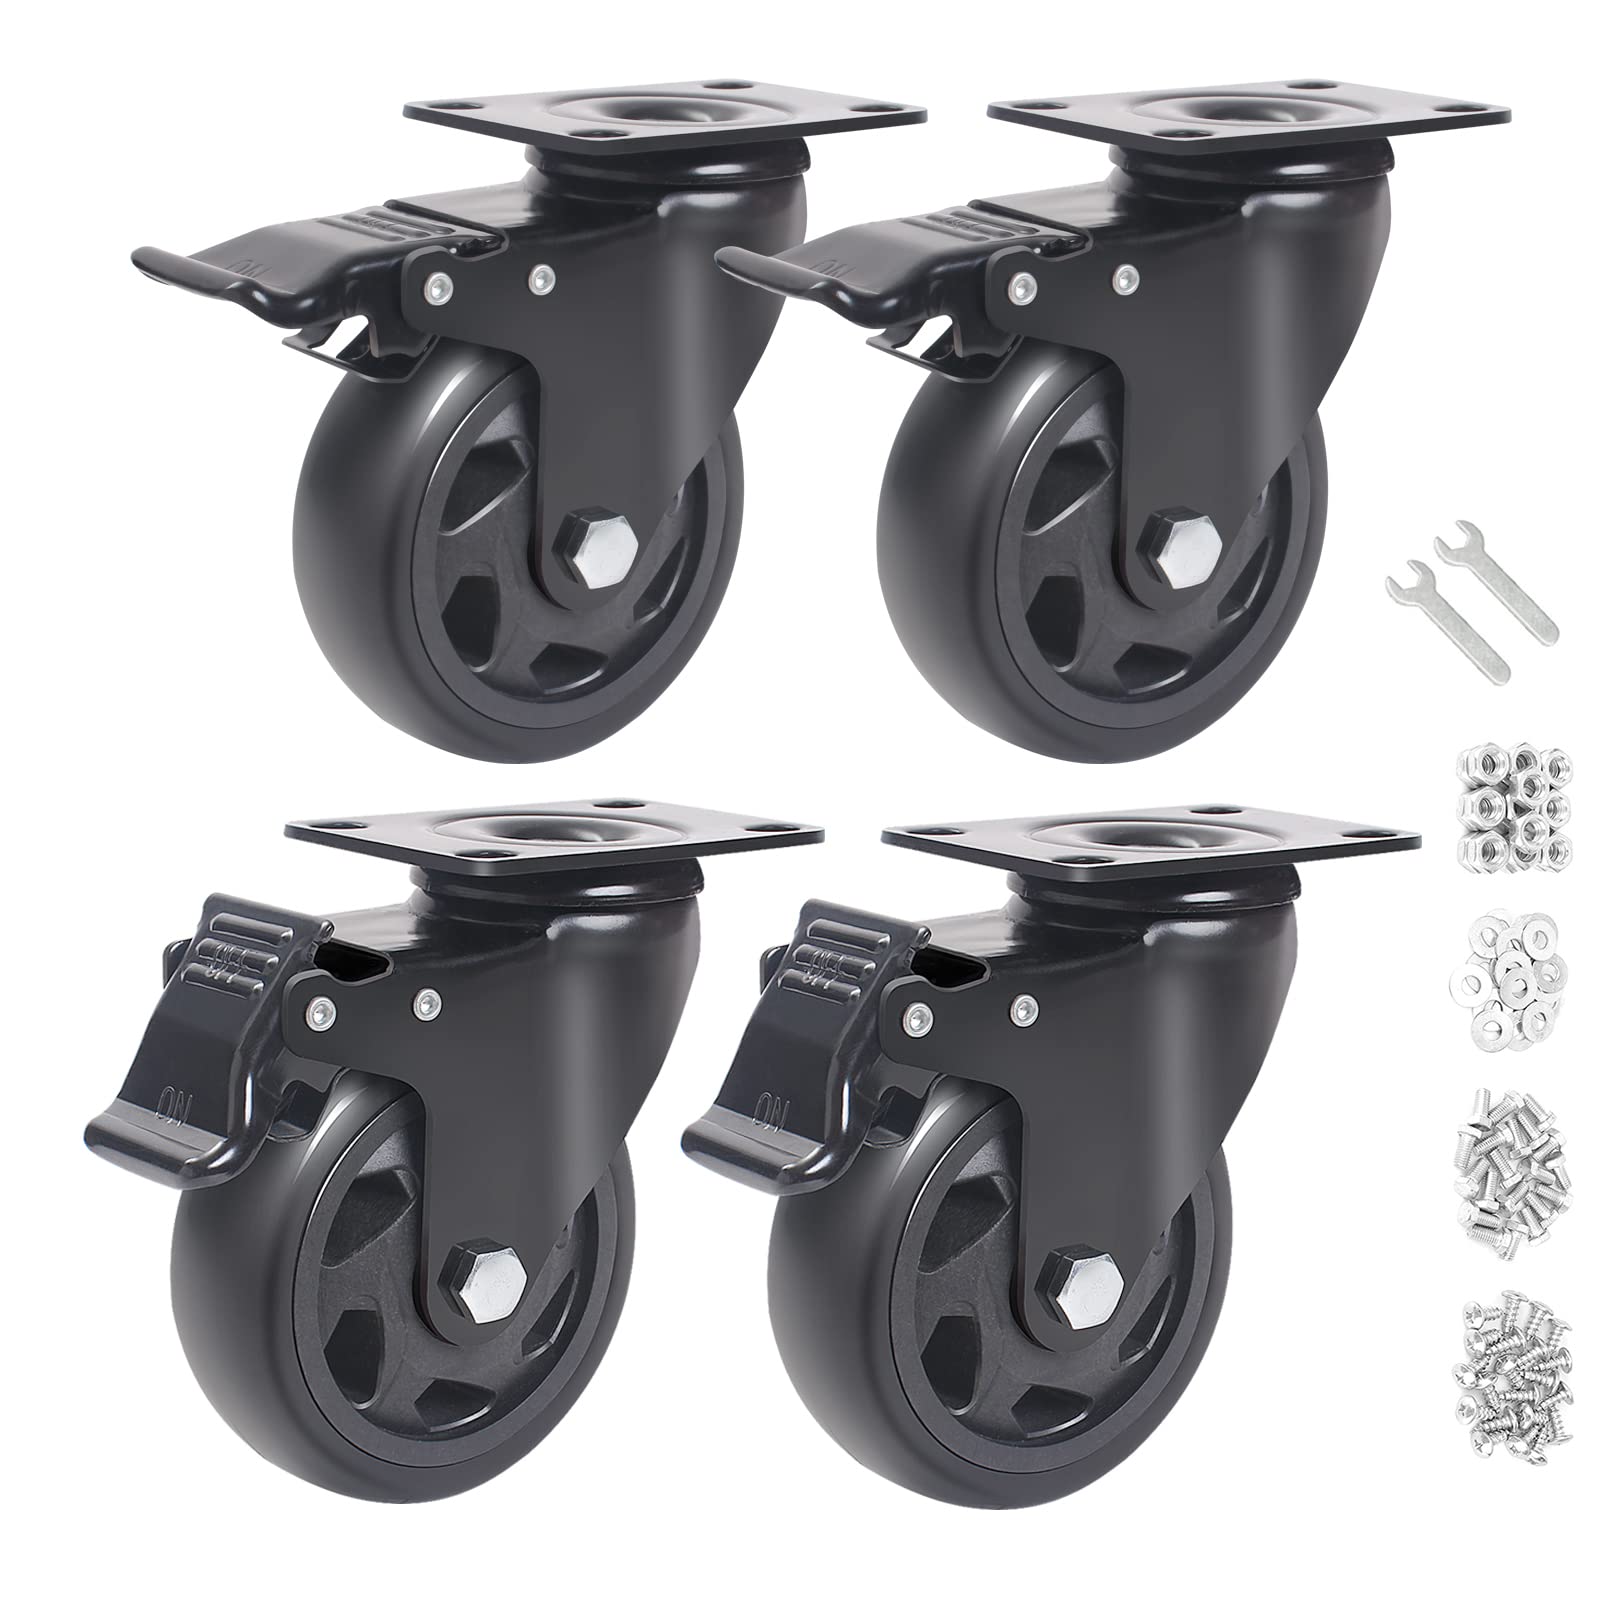 4 Inch Caster Wheels 2000lbs,Casters Set of 4,Heavy Duty Plate Casters with Double Ball Bearings,YAEMIKY Premium Polyurethane Swivel Caster Wheels for Cart,Furniture,Workbench（16pcs Screws Included)